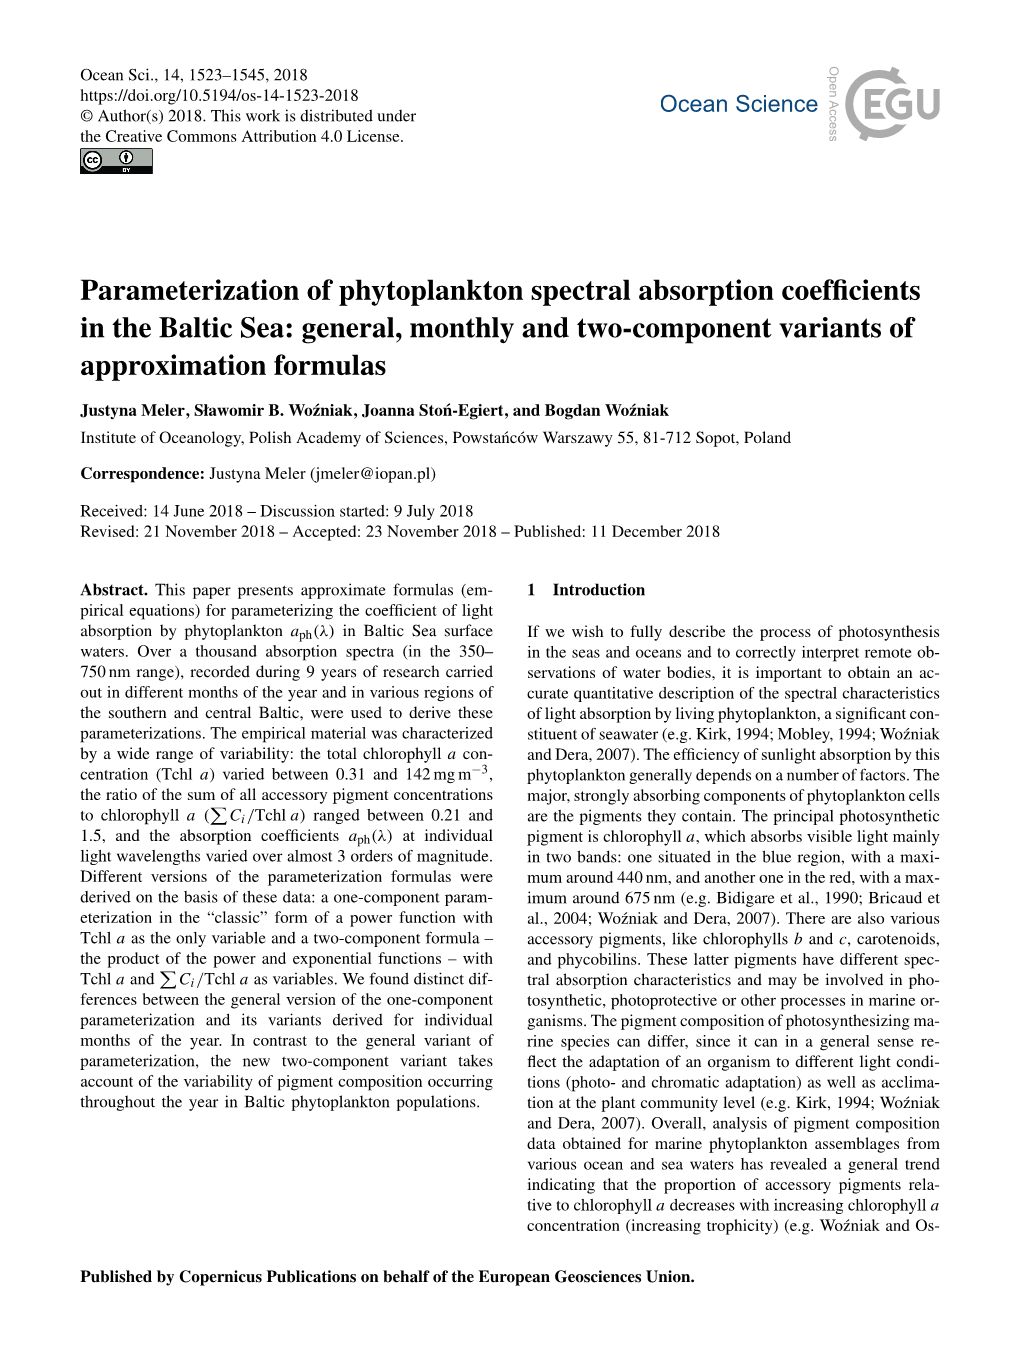 Parameterization of Phytoplankton Spectral Absorption Coefficients In